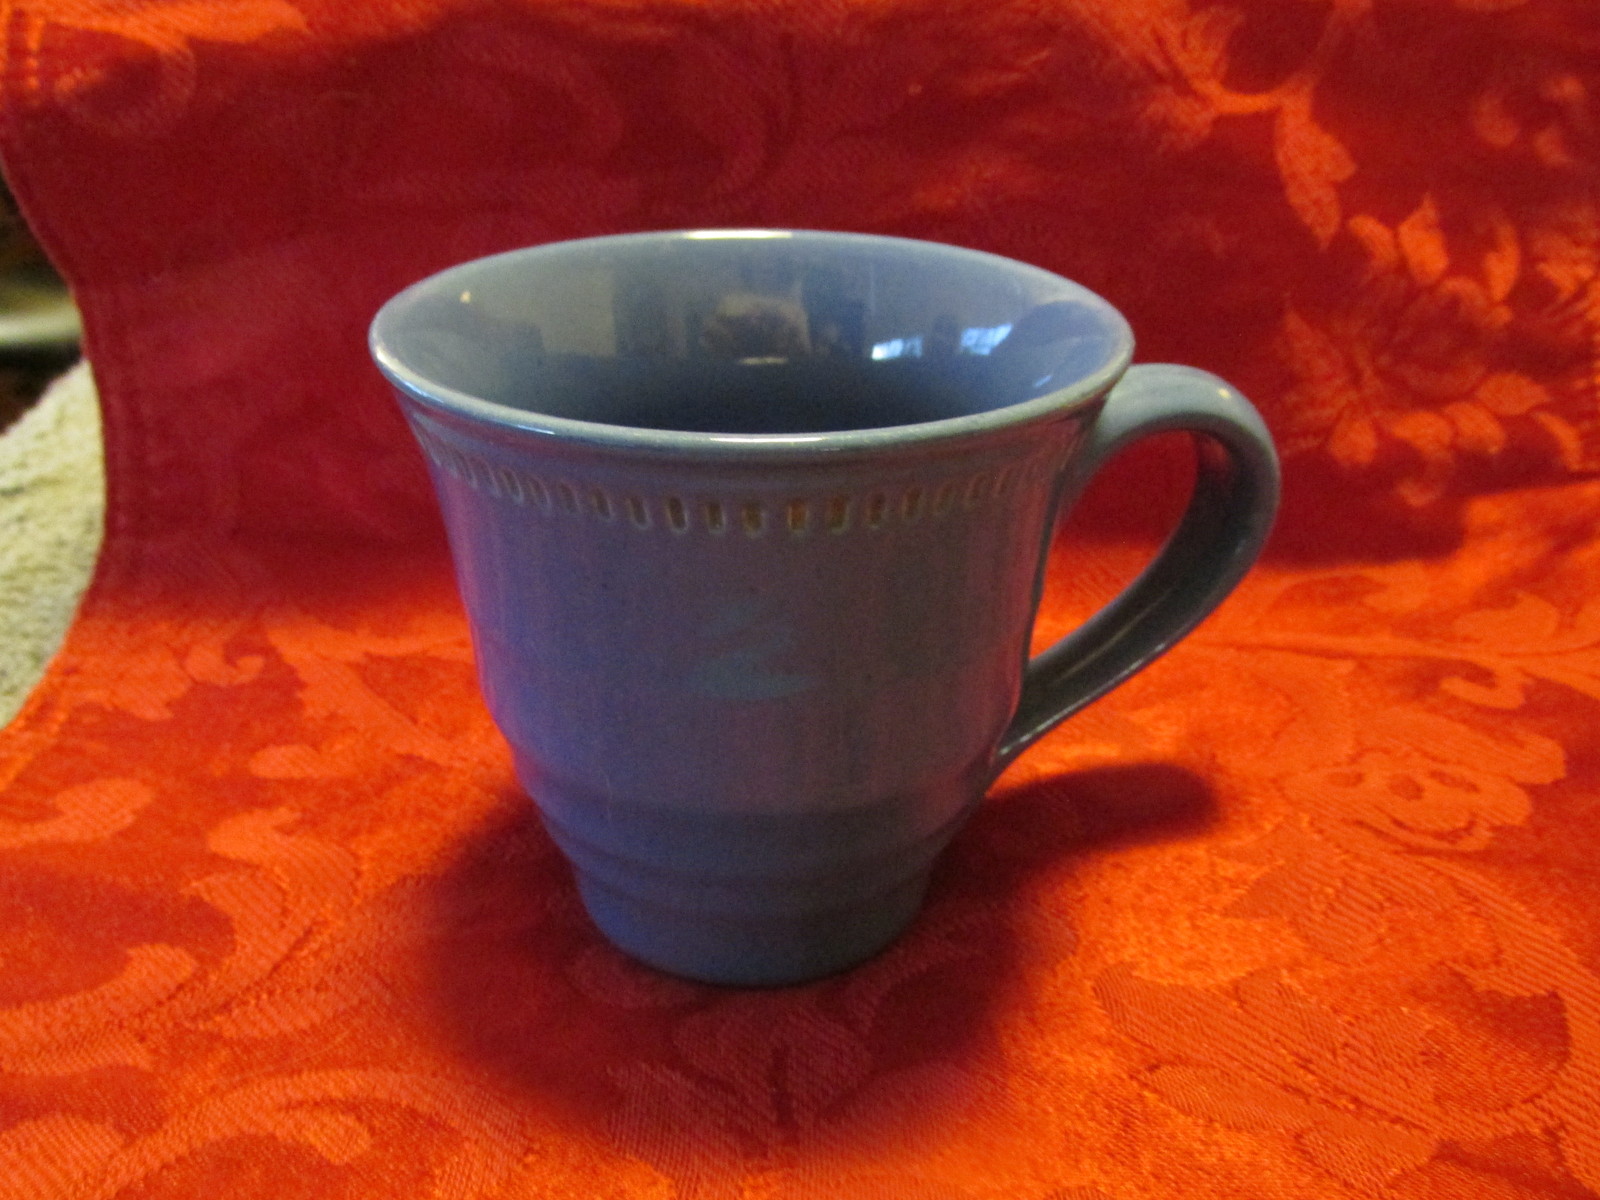 Craft Colors by Dansk Blue Coffee Cup - $3.99